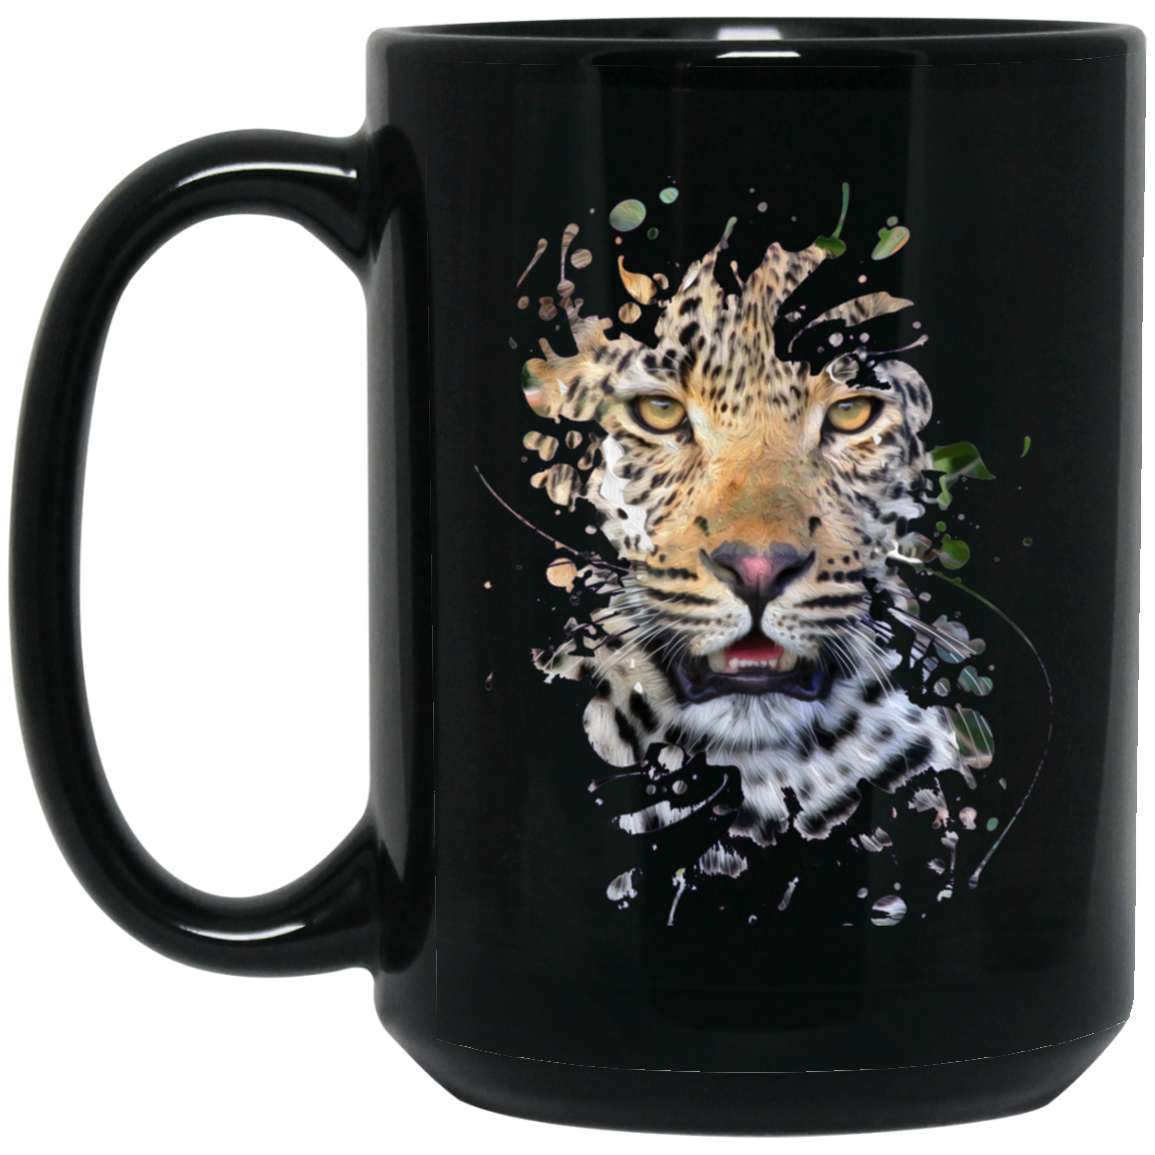 Disappearing Leopard - Mugs